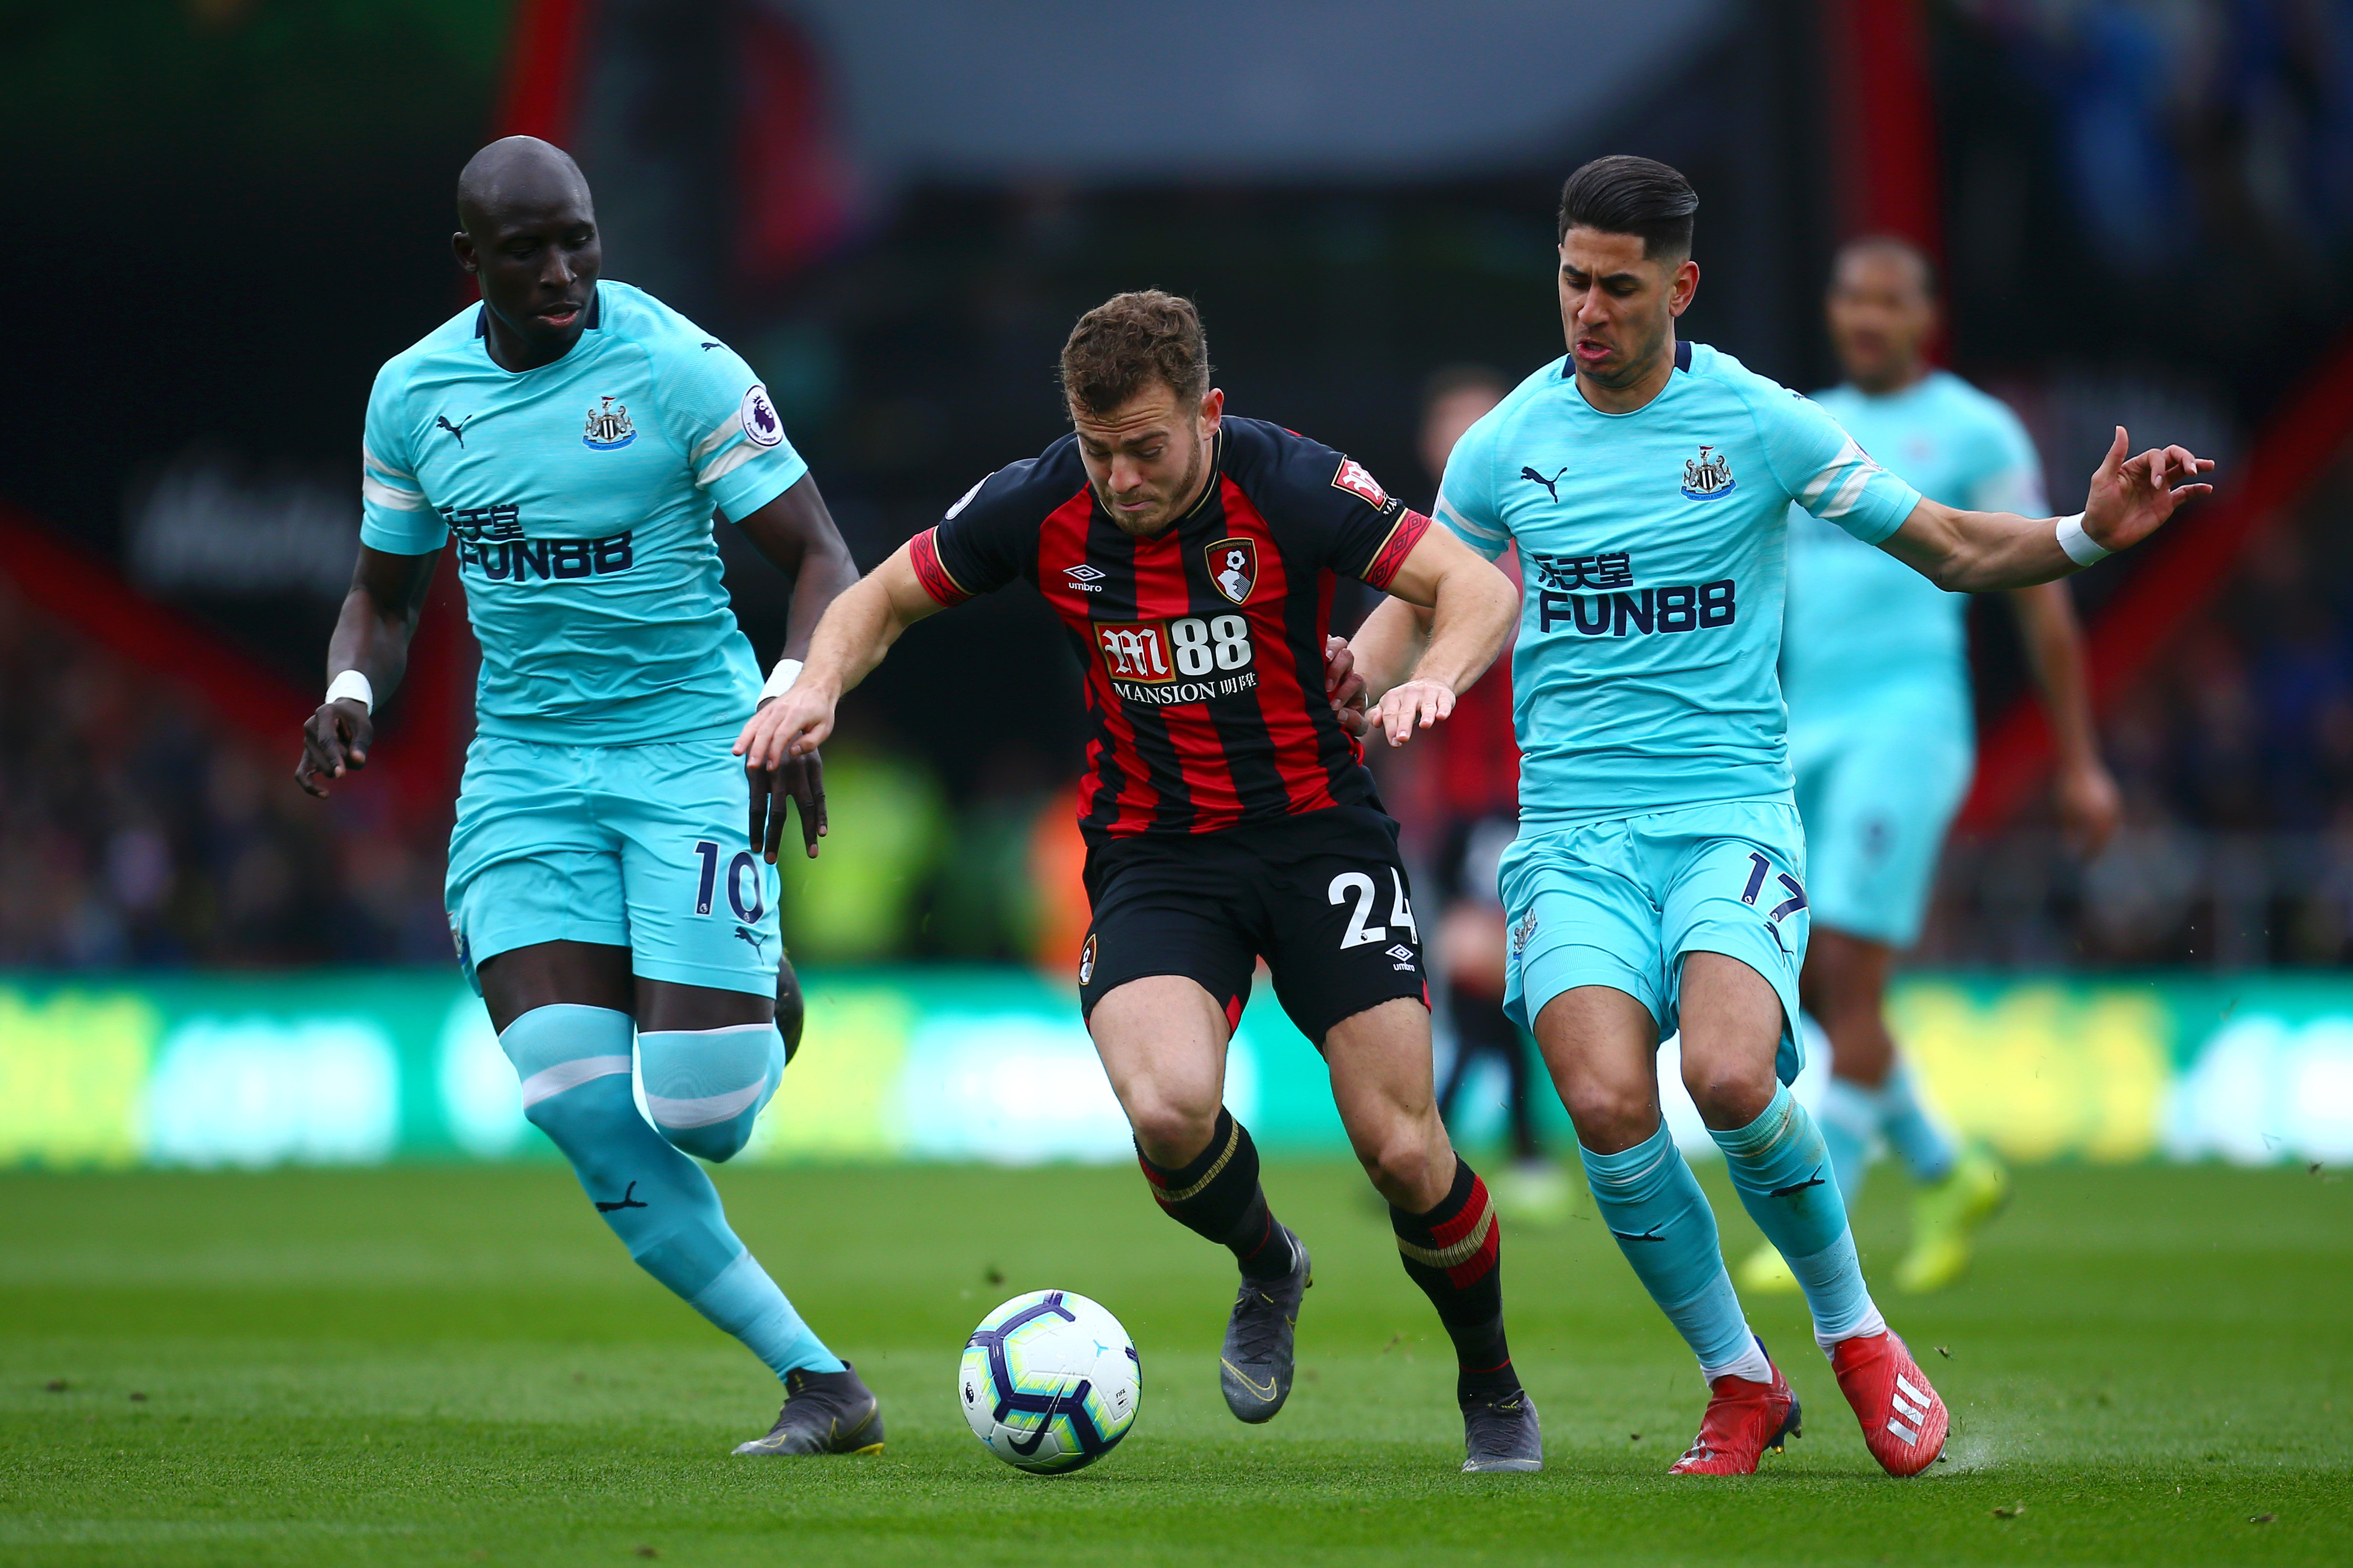 BOURNEMOUTH, ENGLAND - MARCH 16: Ryan Fraser of AFC Bournemouth is challenged by Ayoze Perez of Newcastle United and Mohamed Diame of Newcastle United  during the Premier League match between AFC Bournemouth and Newcastle United at Vitality Stadium on March 16, 2019 in Bournemouth, United Kingdom. (Photo by Jordan Mansfield/Getty Images)